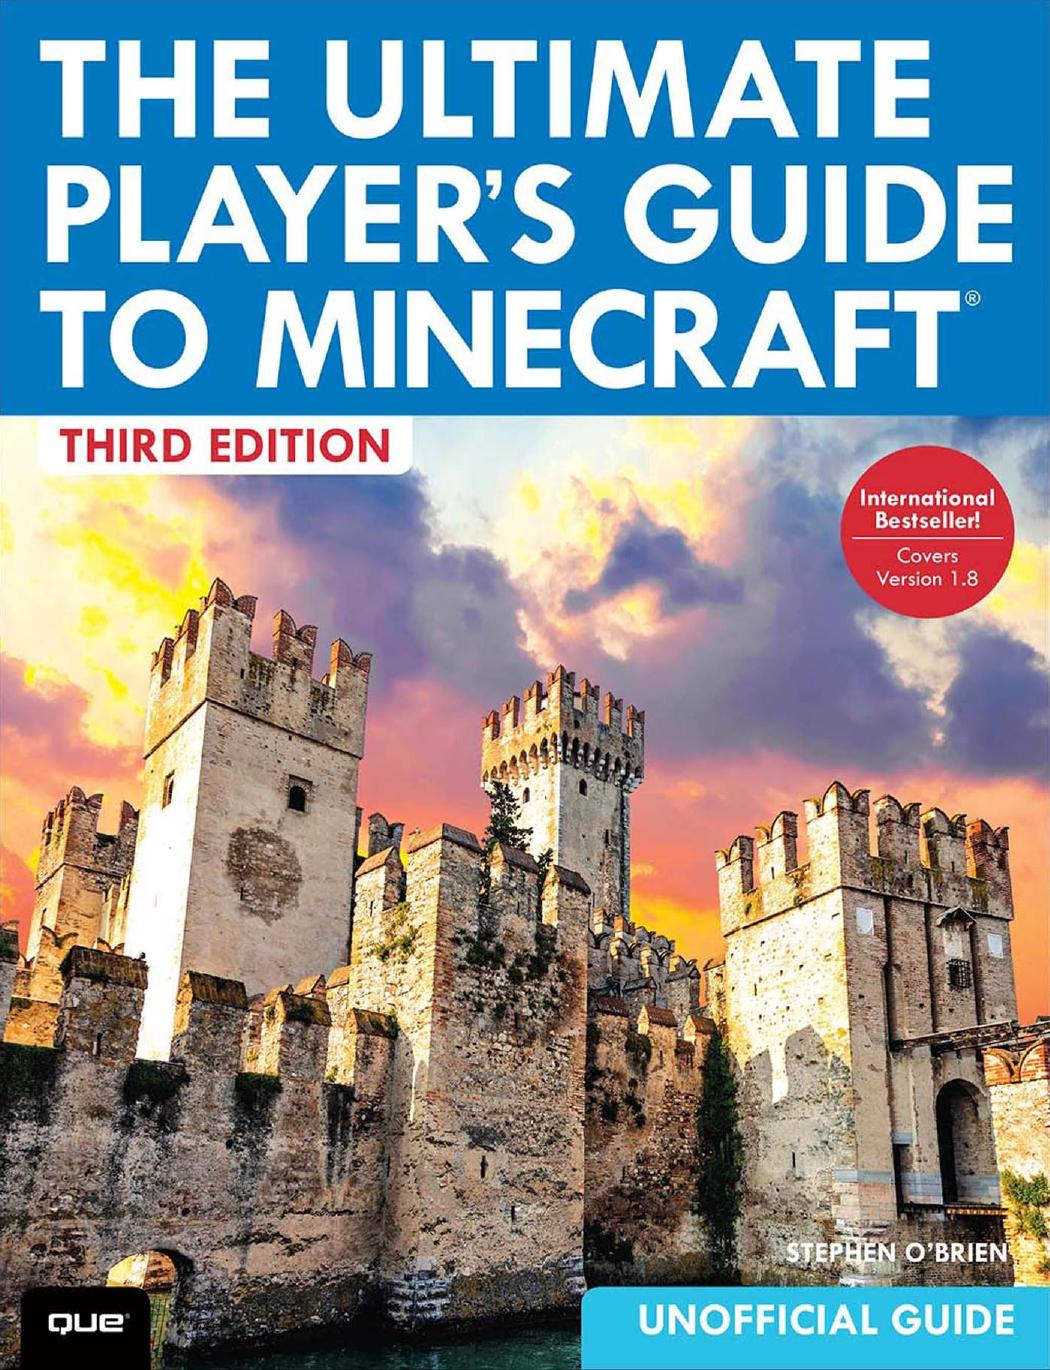 The Ultimate Player's Guide to Minecraft by Stephen O'Brien